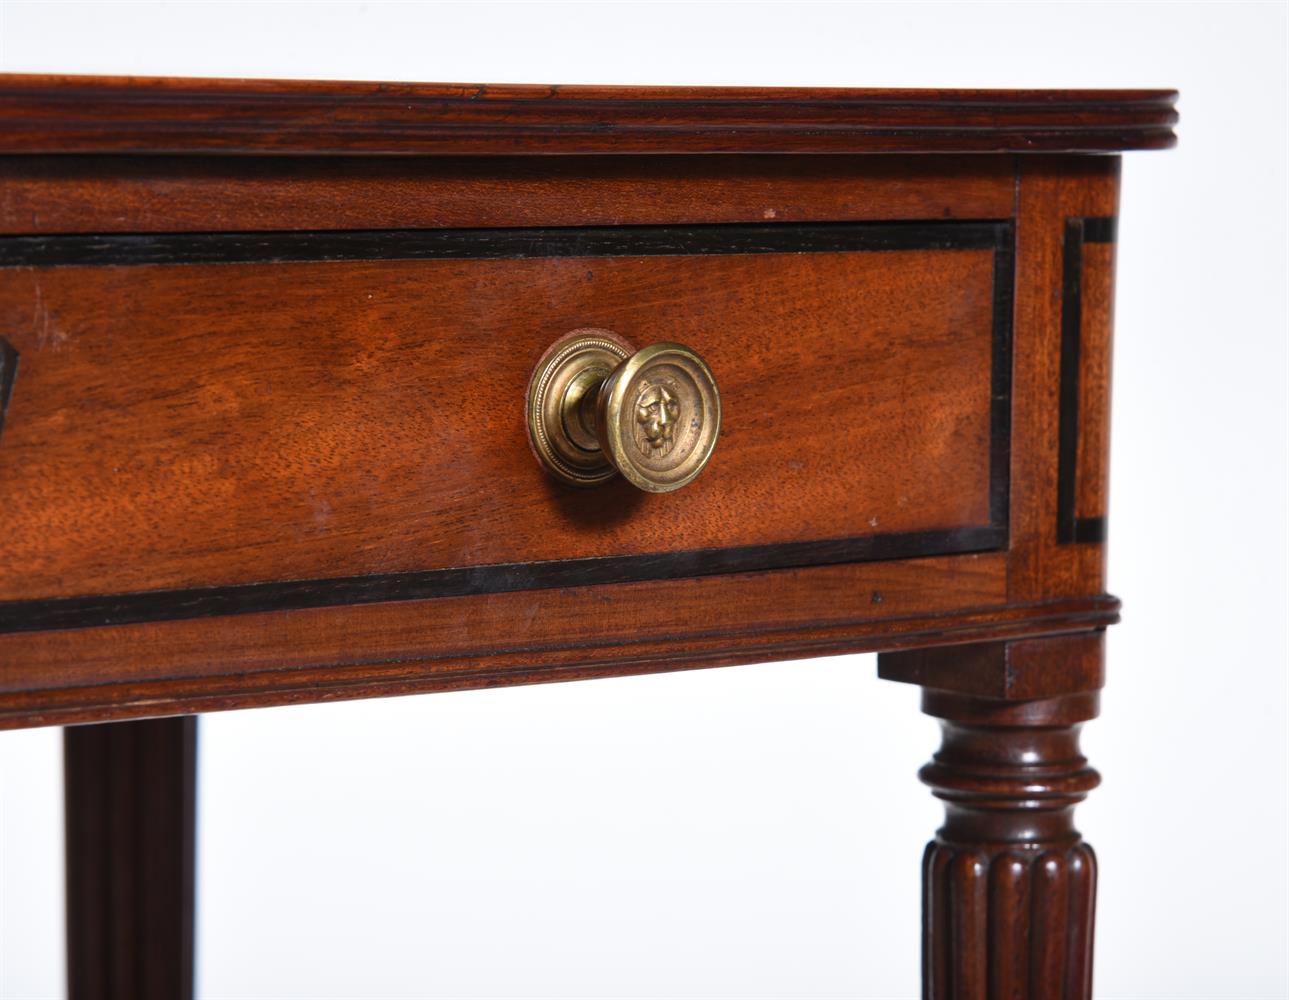 Y A LATE GEORGE III MAHOGANY AND EBONY BANDED 'CHAMBER' TABLE, ATTRIBUTED TO GILLOWS, CIRCA 1810 - Image 3 of 3